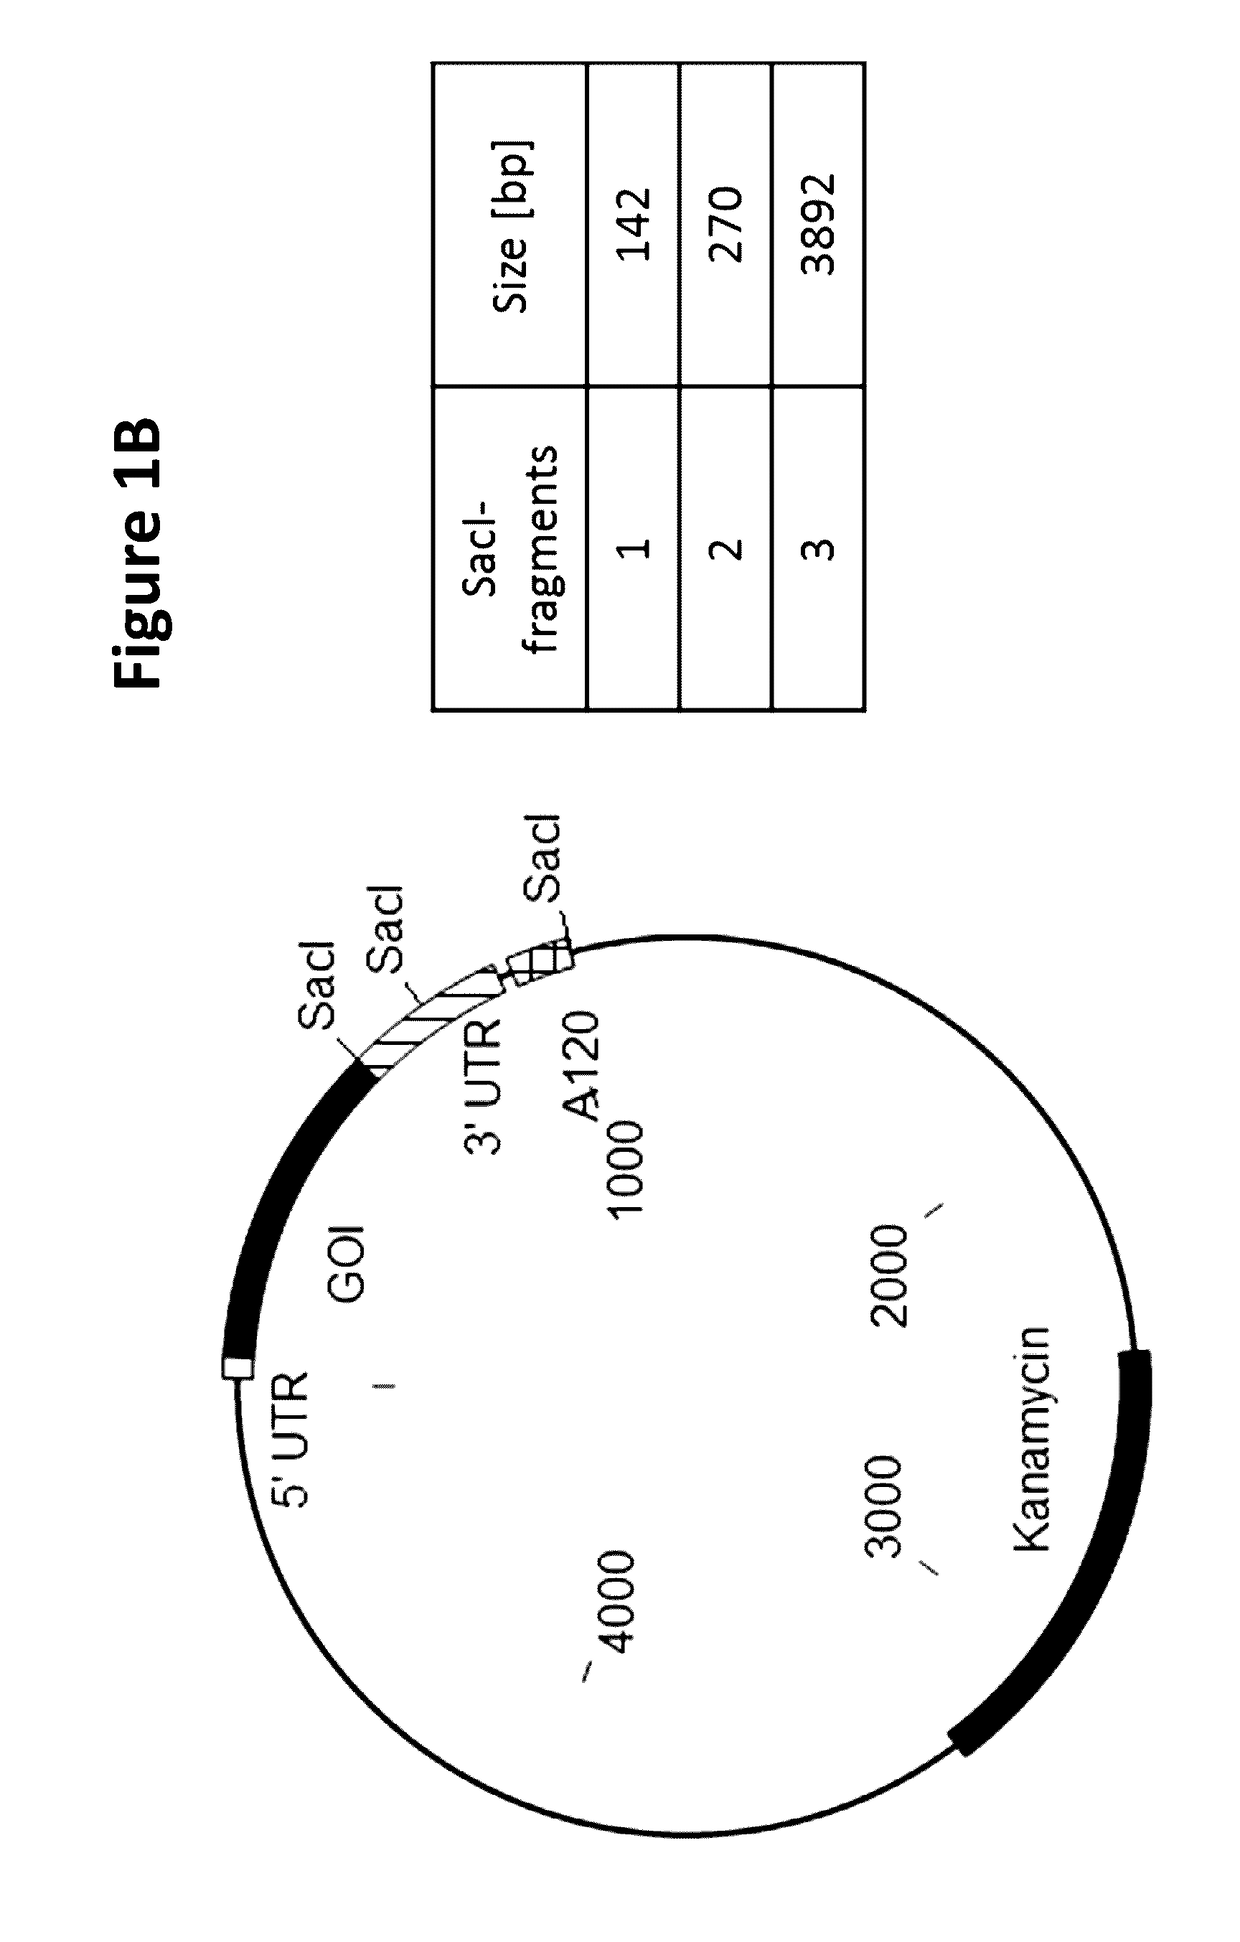 Stabilization of poly(a) sequence encoding DNA sequences